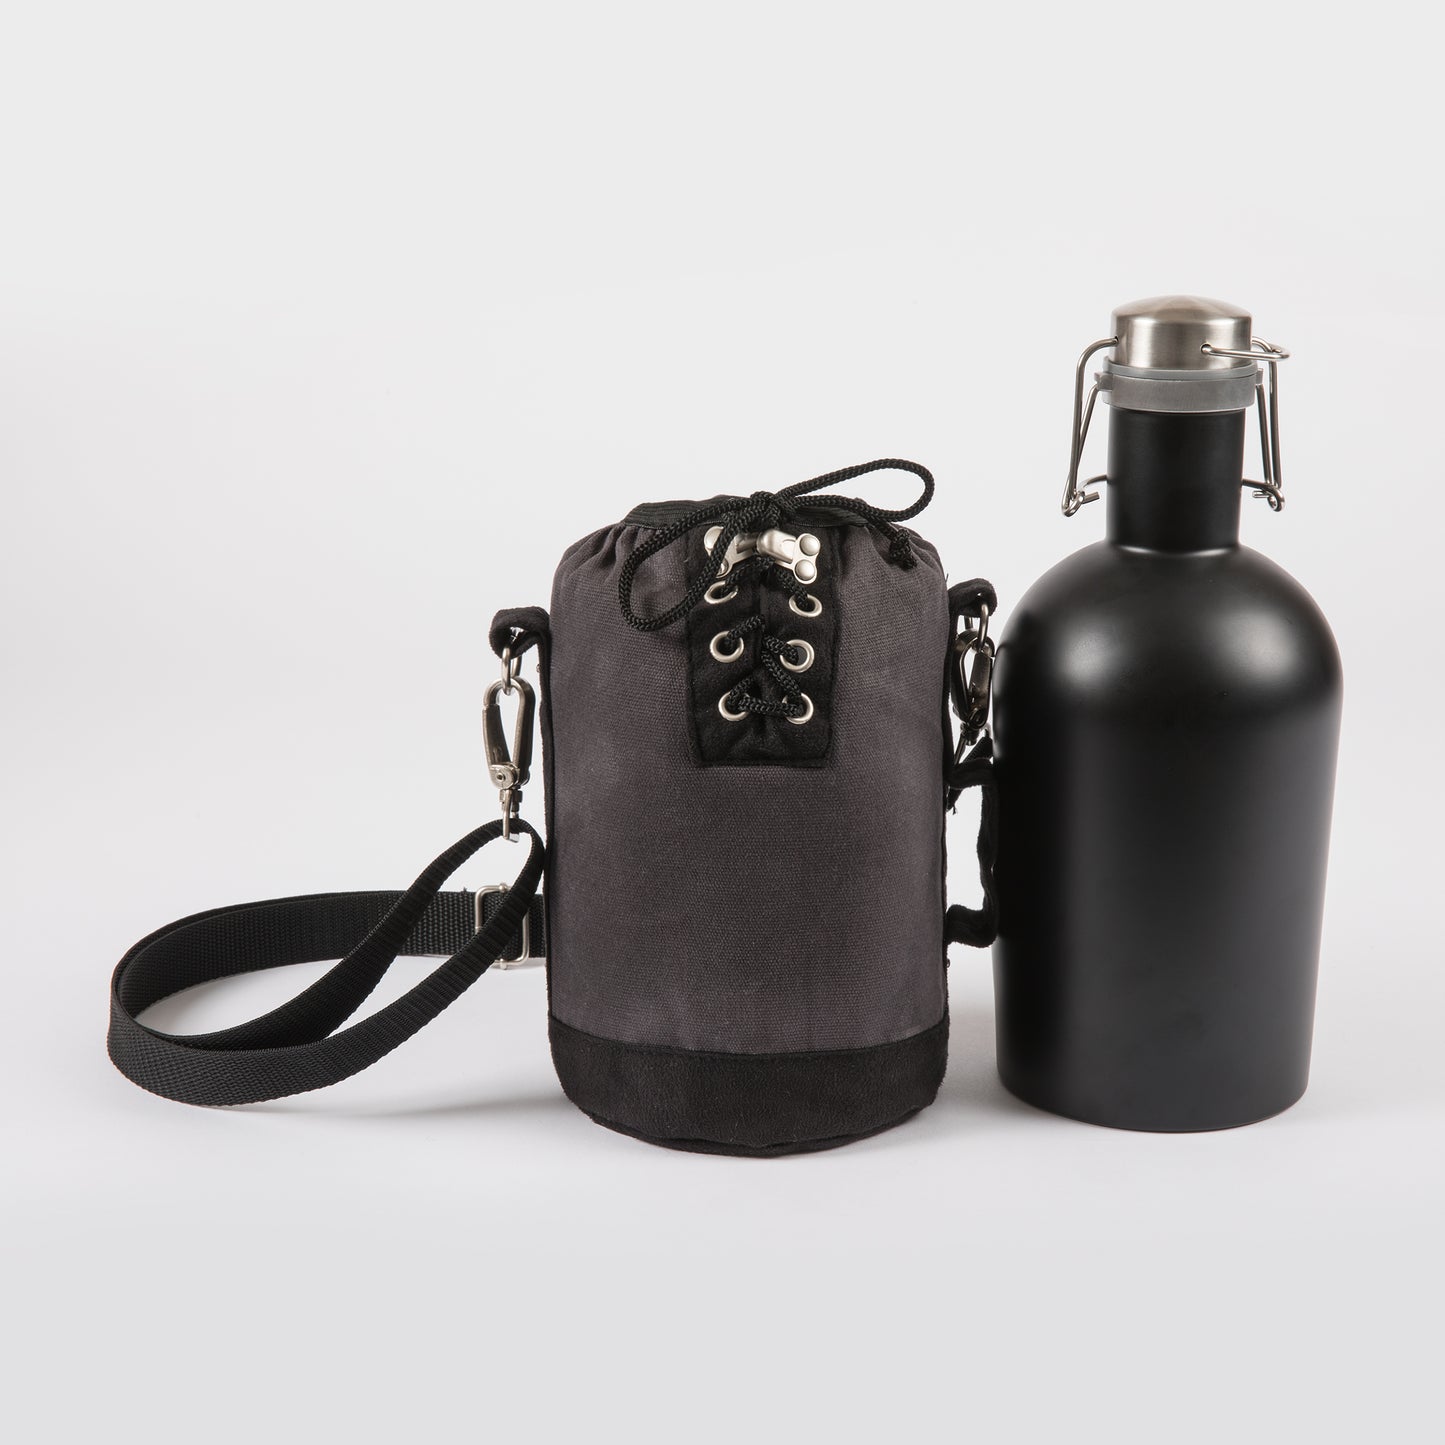 Insulated Growler Tote with Matte Black 64 oz. Stainless Steel Growler